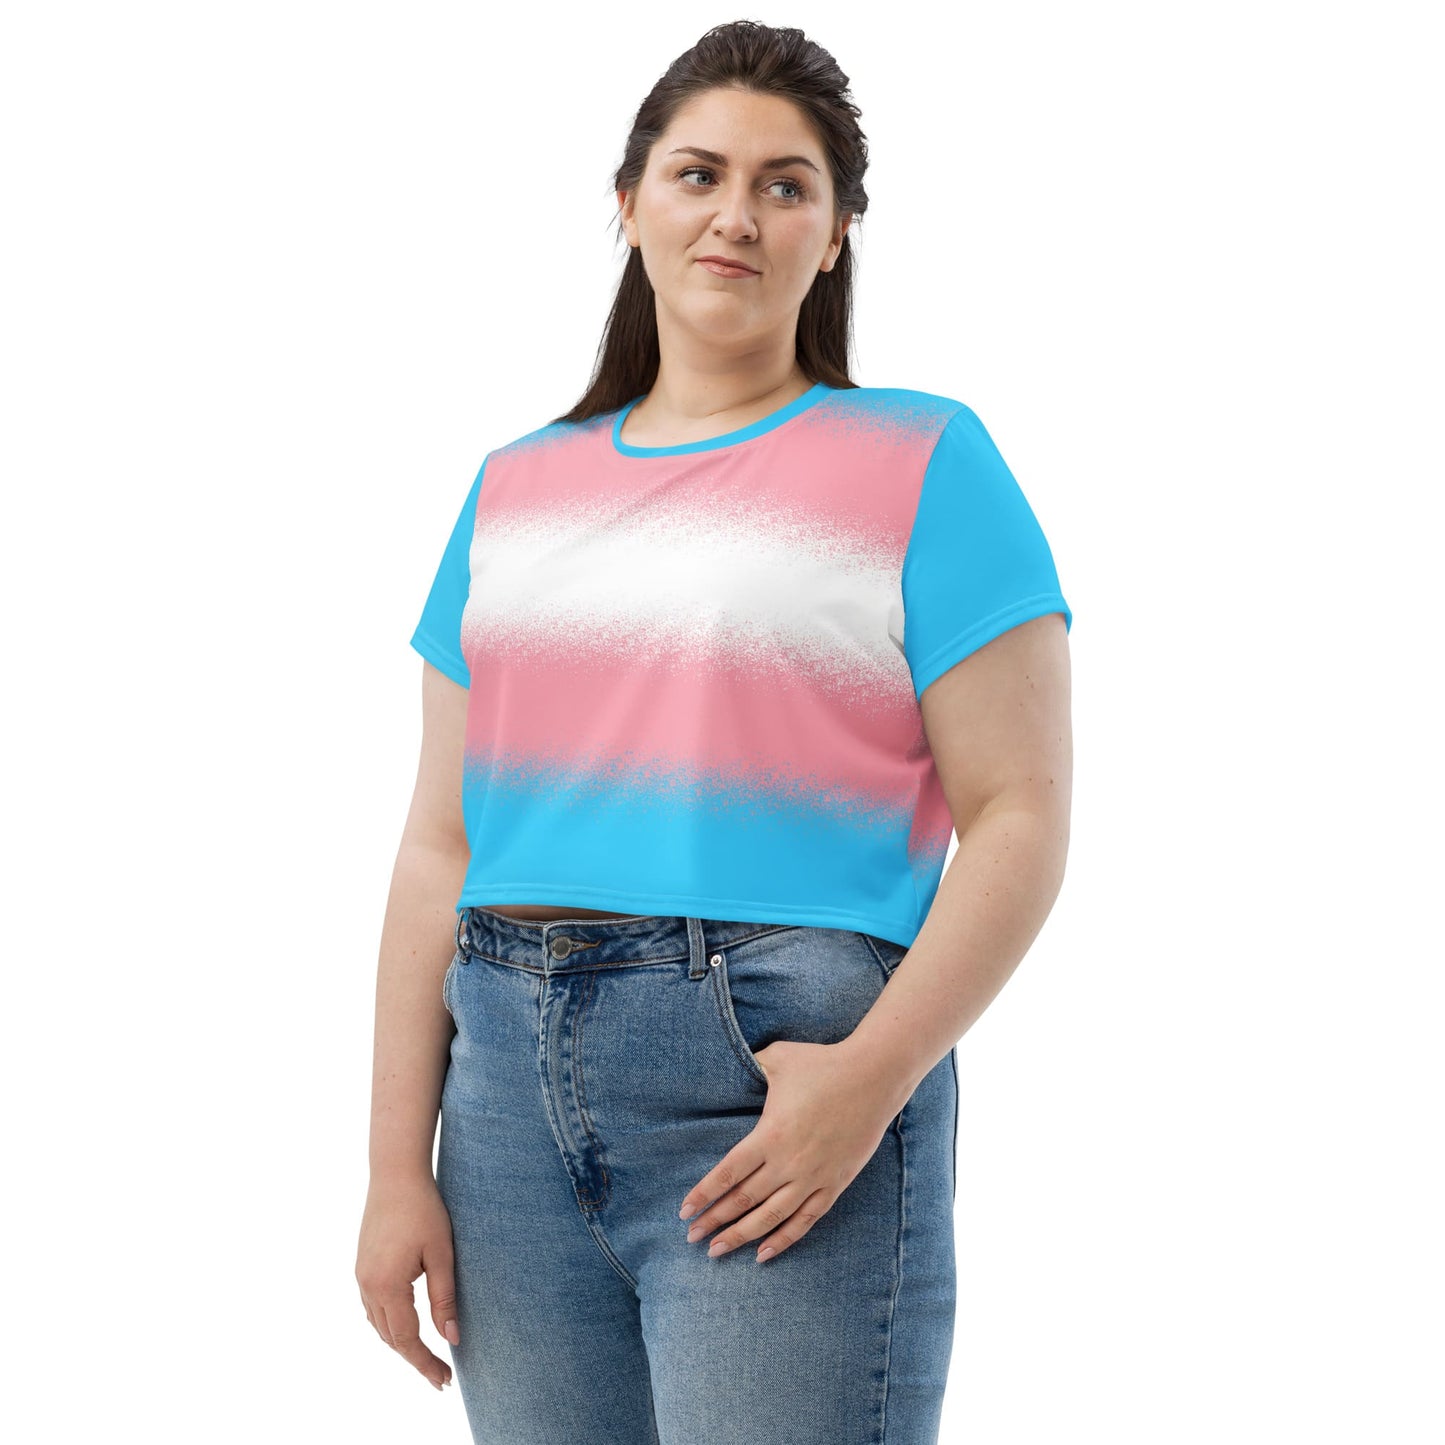 transgender crop top, trans pride cropped shirt with wings on the back, right